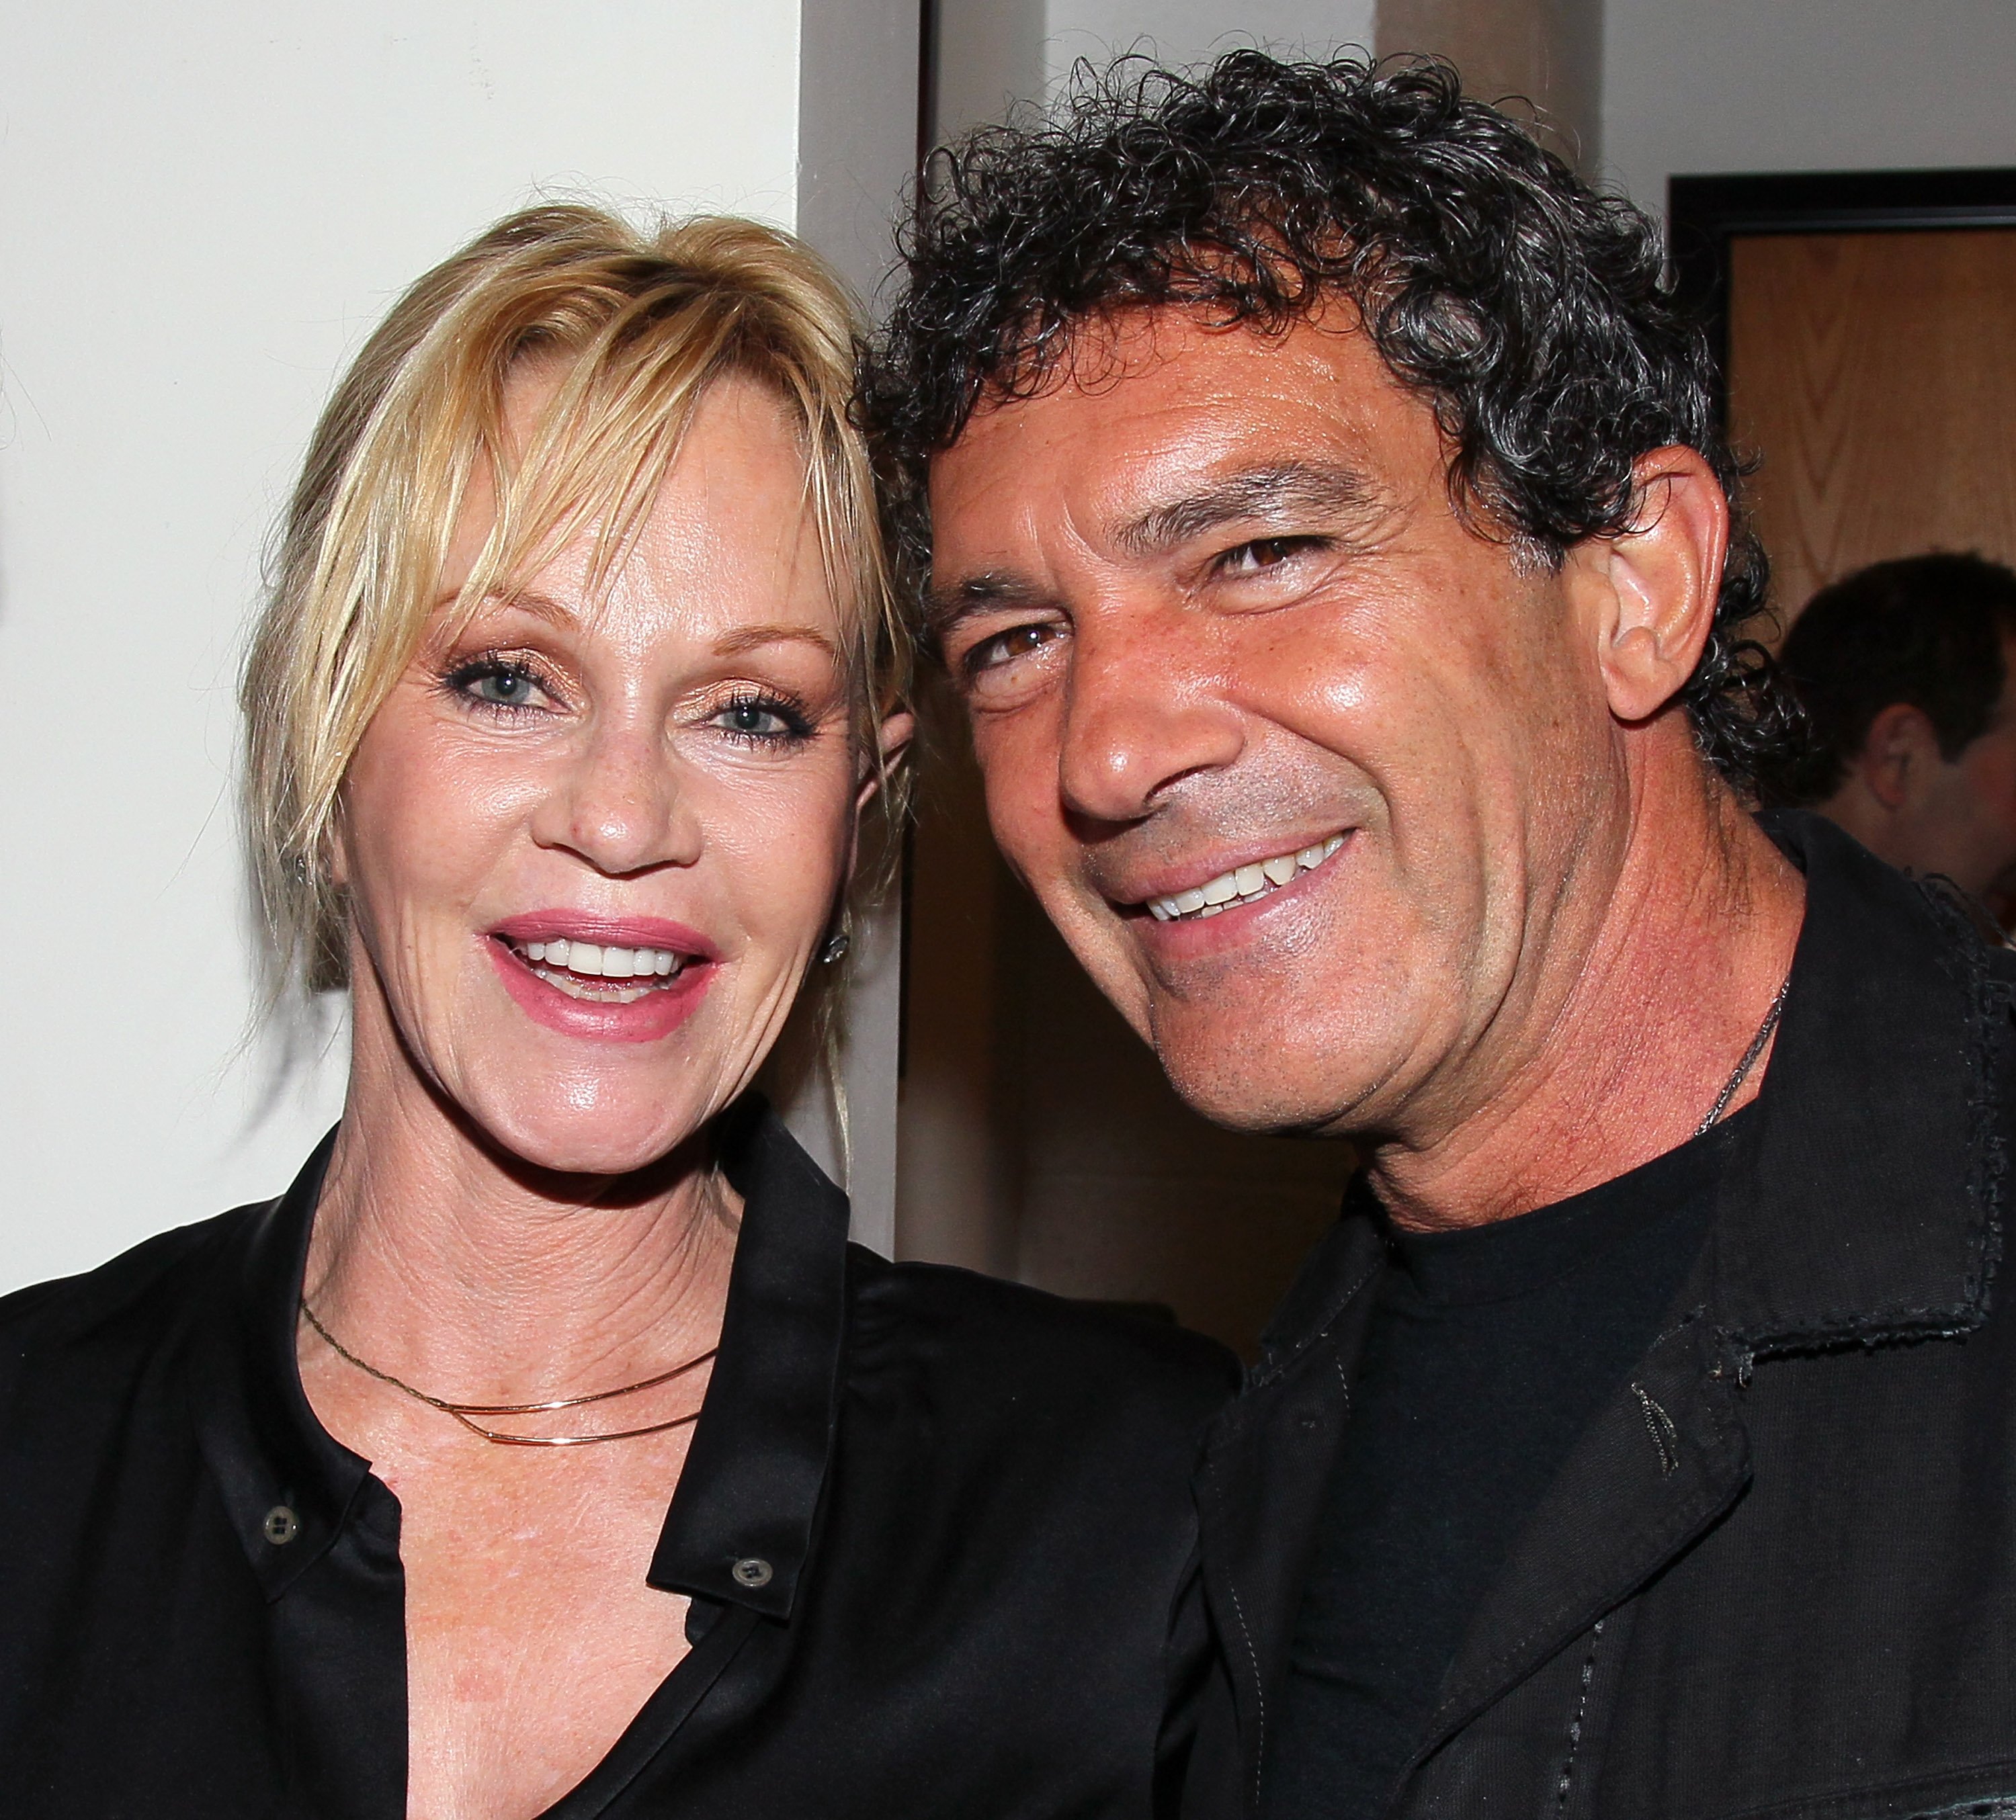 Melanie Griffith and husband actor Antonio Banderas posing at the opening night of "No Way Around But Through" at the Falcon Theatre on June 3, 2012, in Burbank, California. | Source: Getty Images